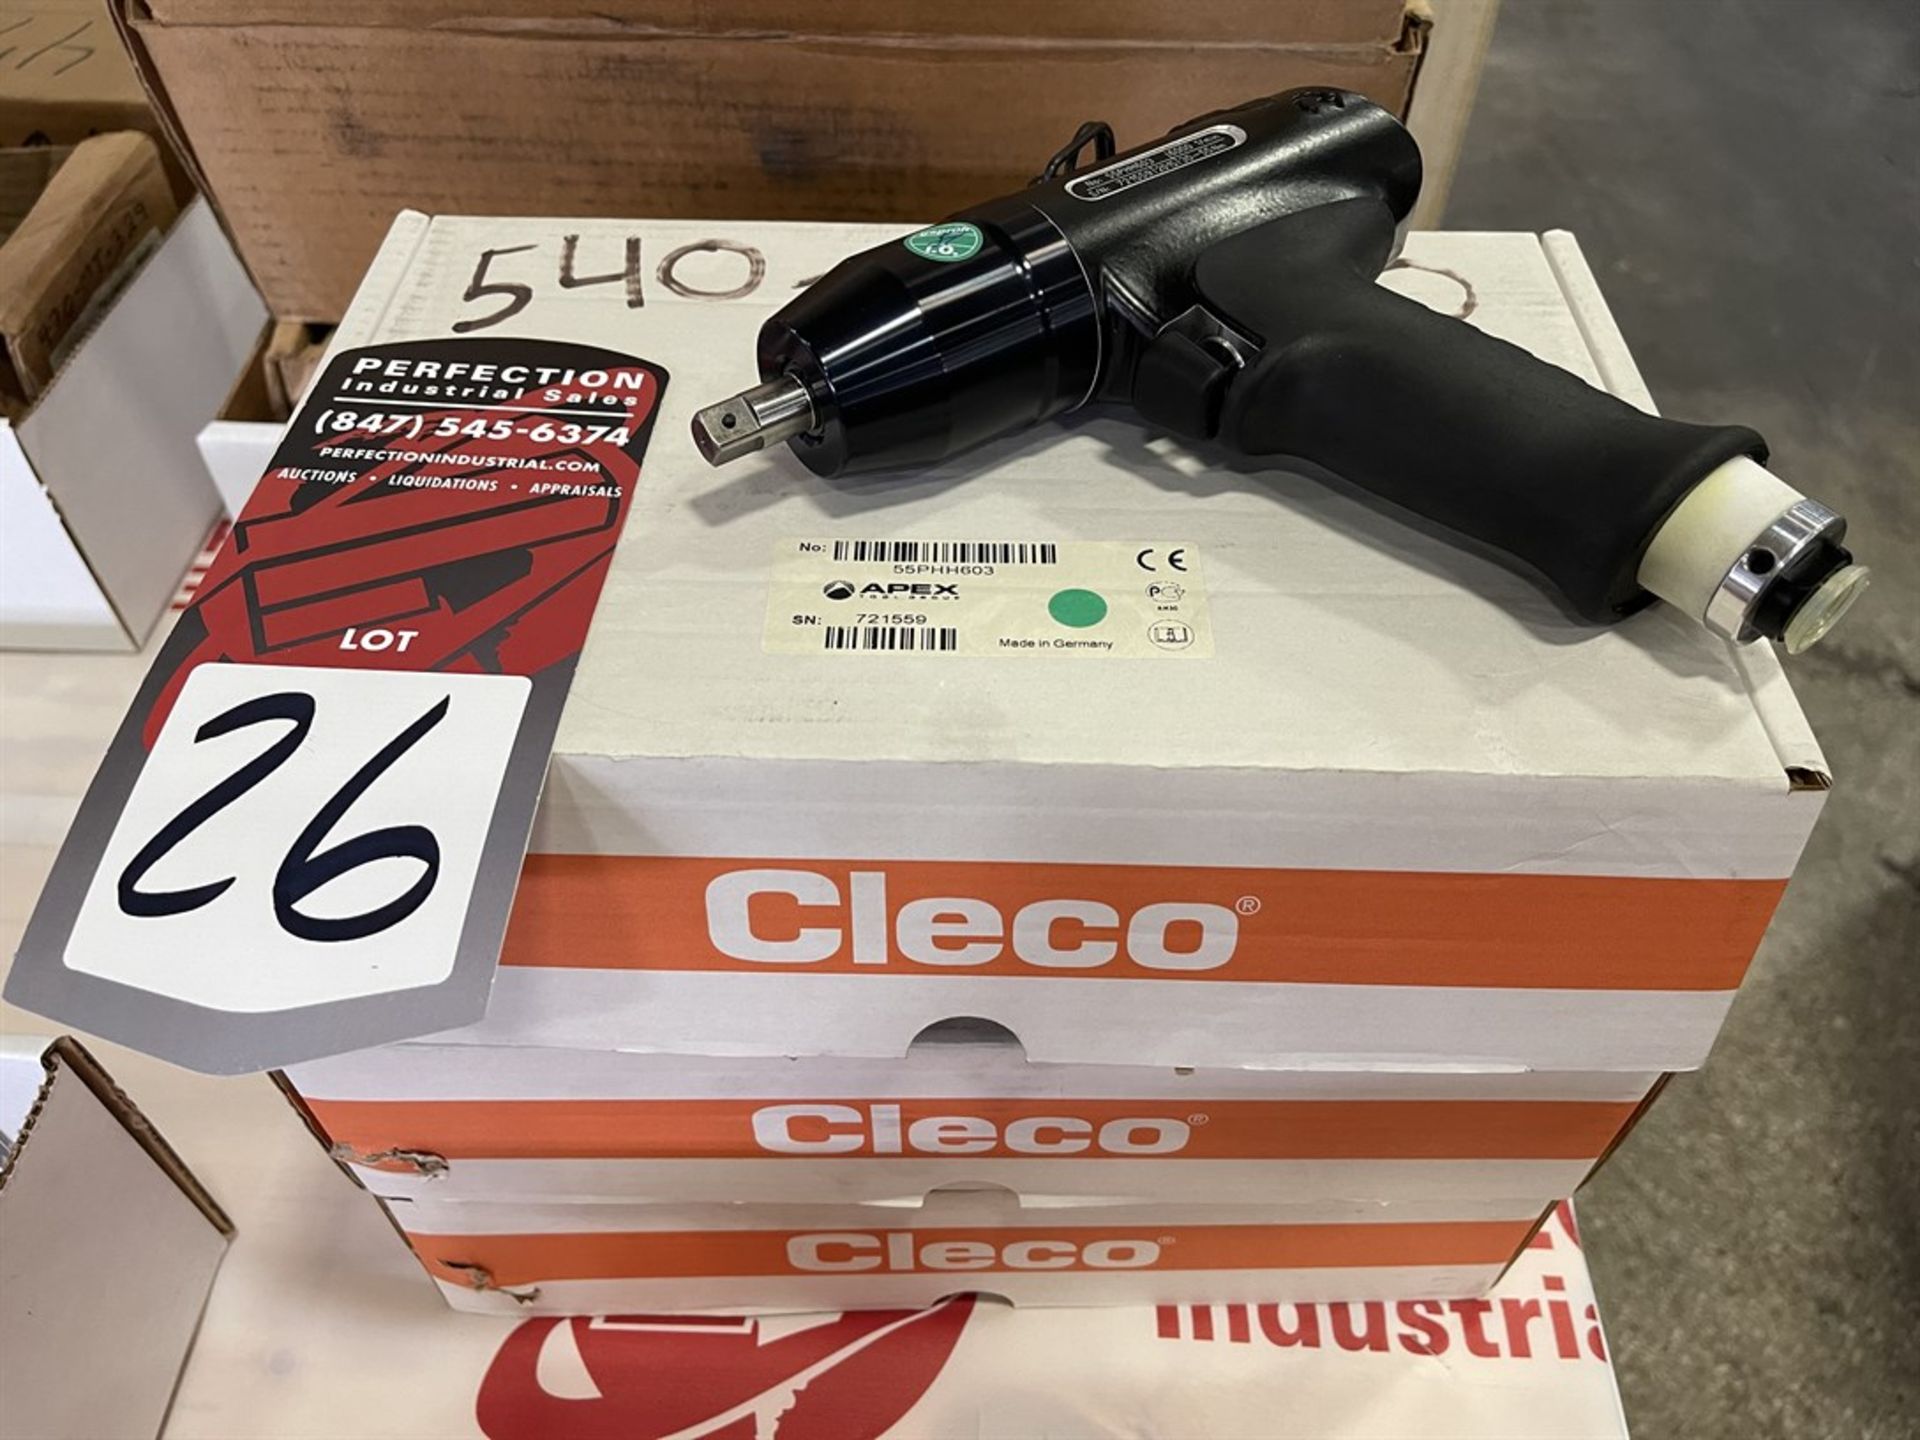 Lot Comprising NEW CLECO 55PHH603 3/8" Pneumatic Impact Wrenches